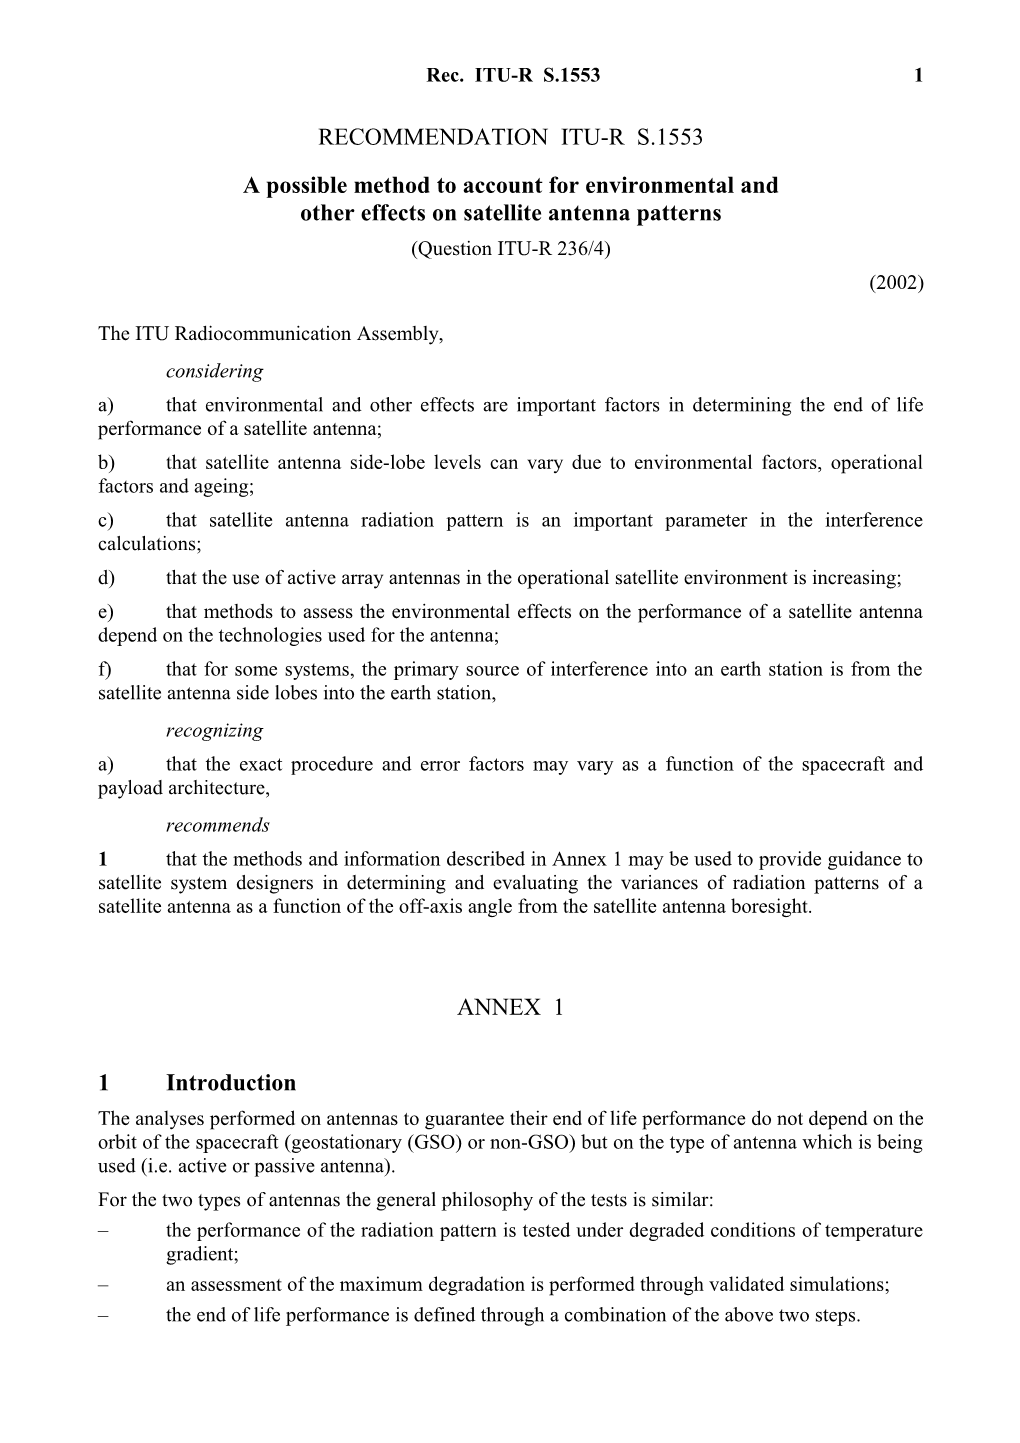 RECOMMENDATION ITU-R S.1553 - a Possible Method to Account for Environmental and Other